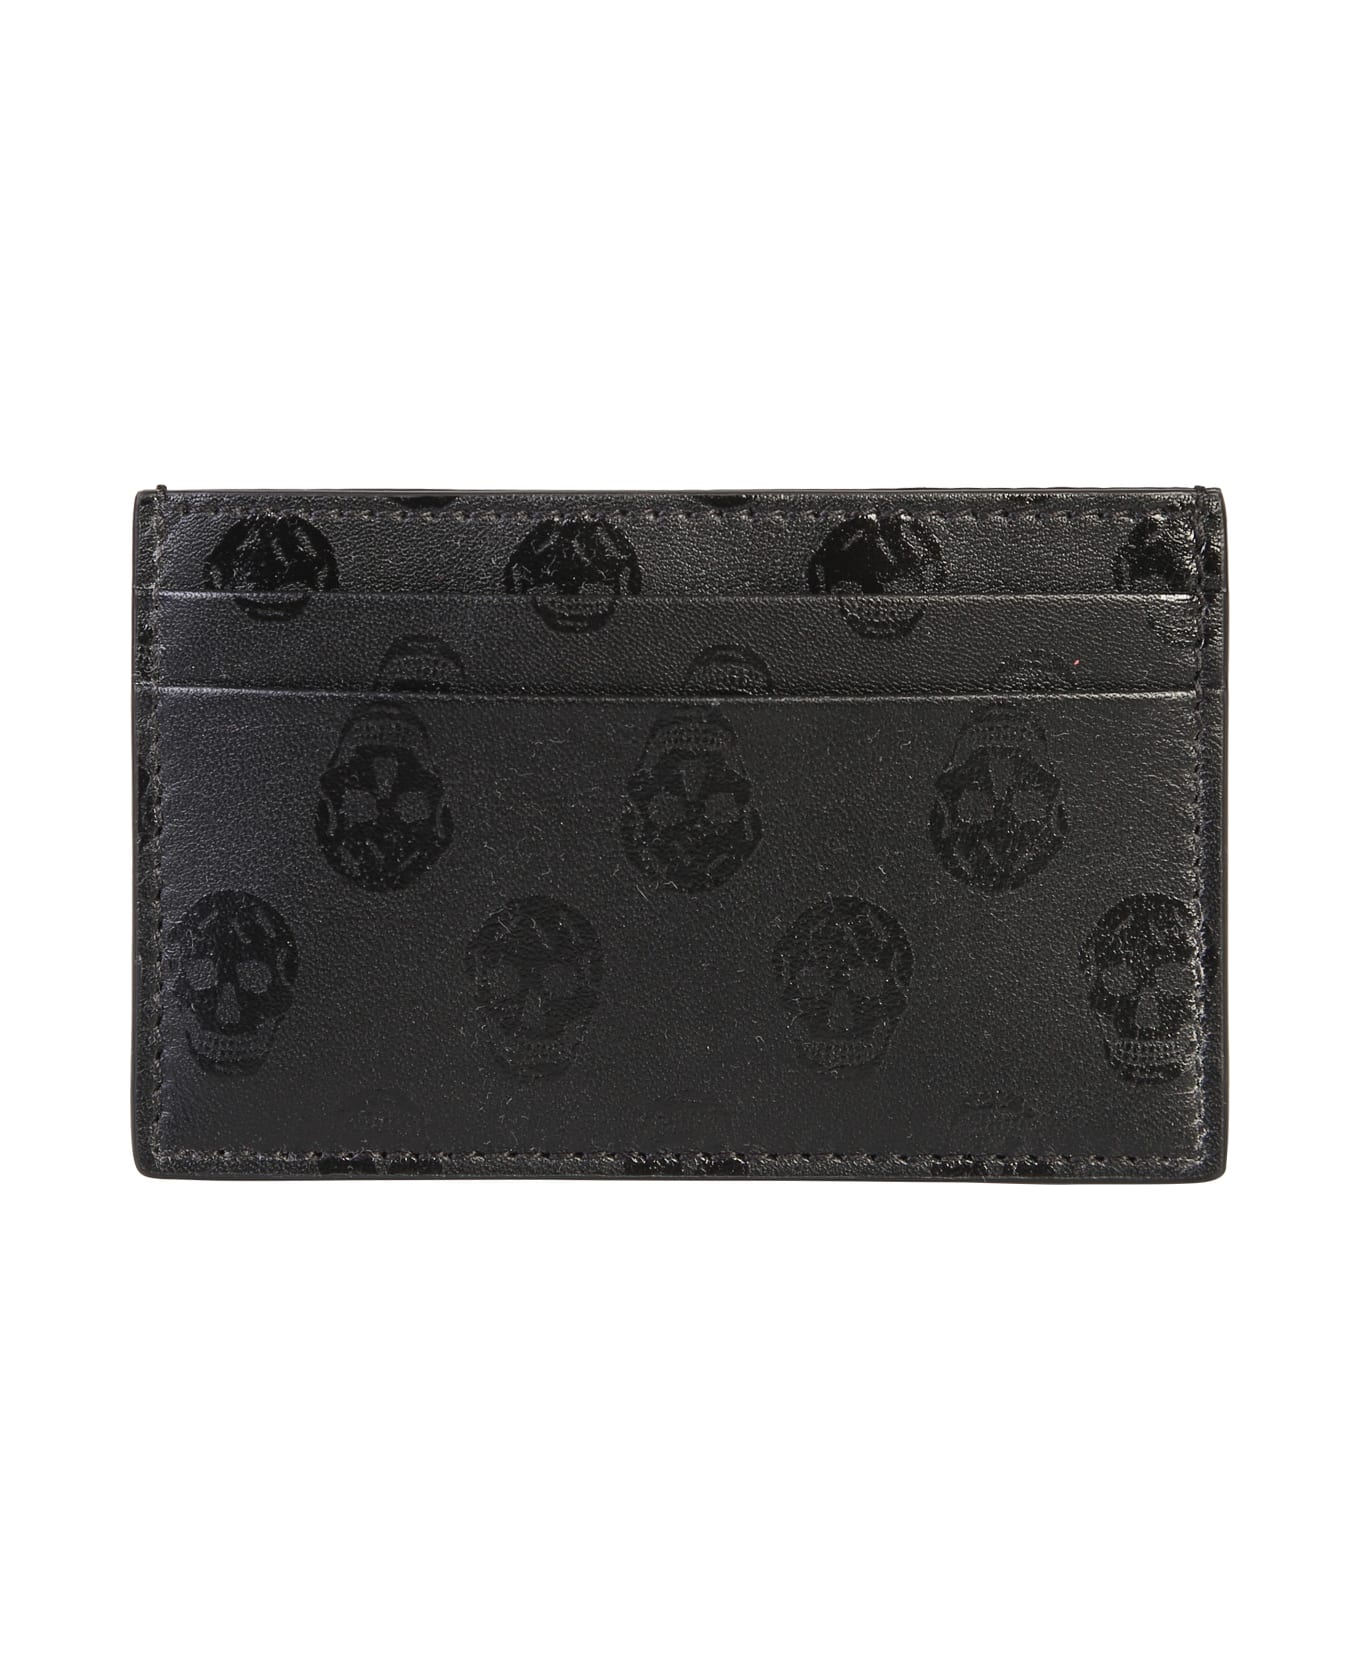 Alexander McQueen Leather Card Holder With Iconic Biker Skull Print - Black